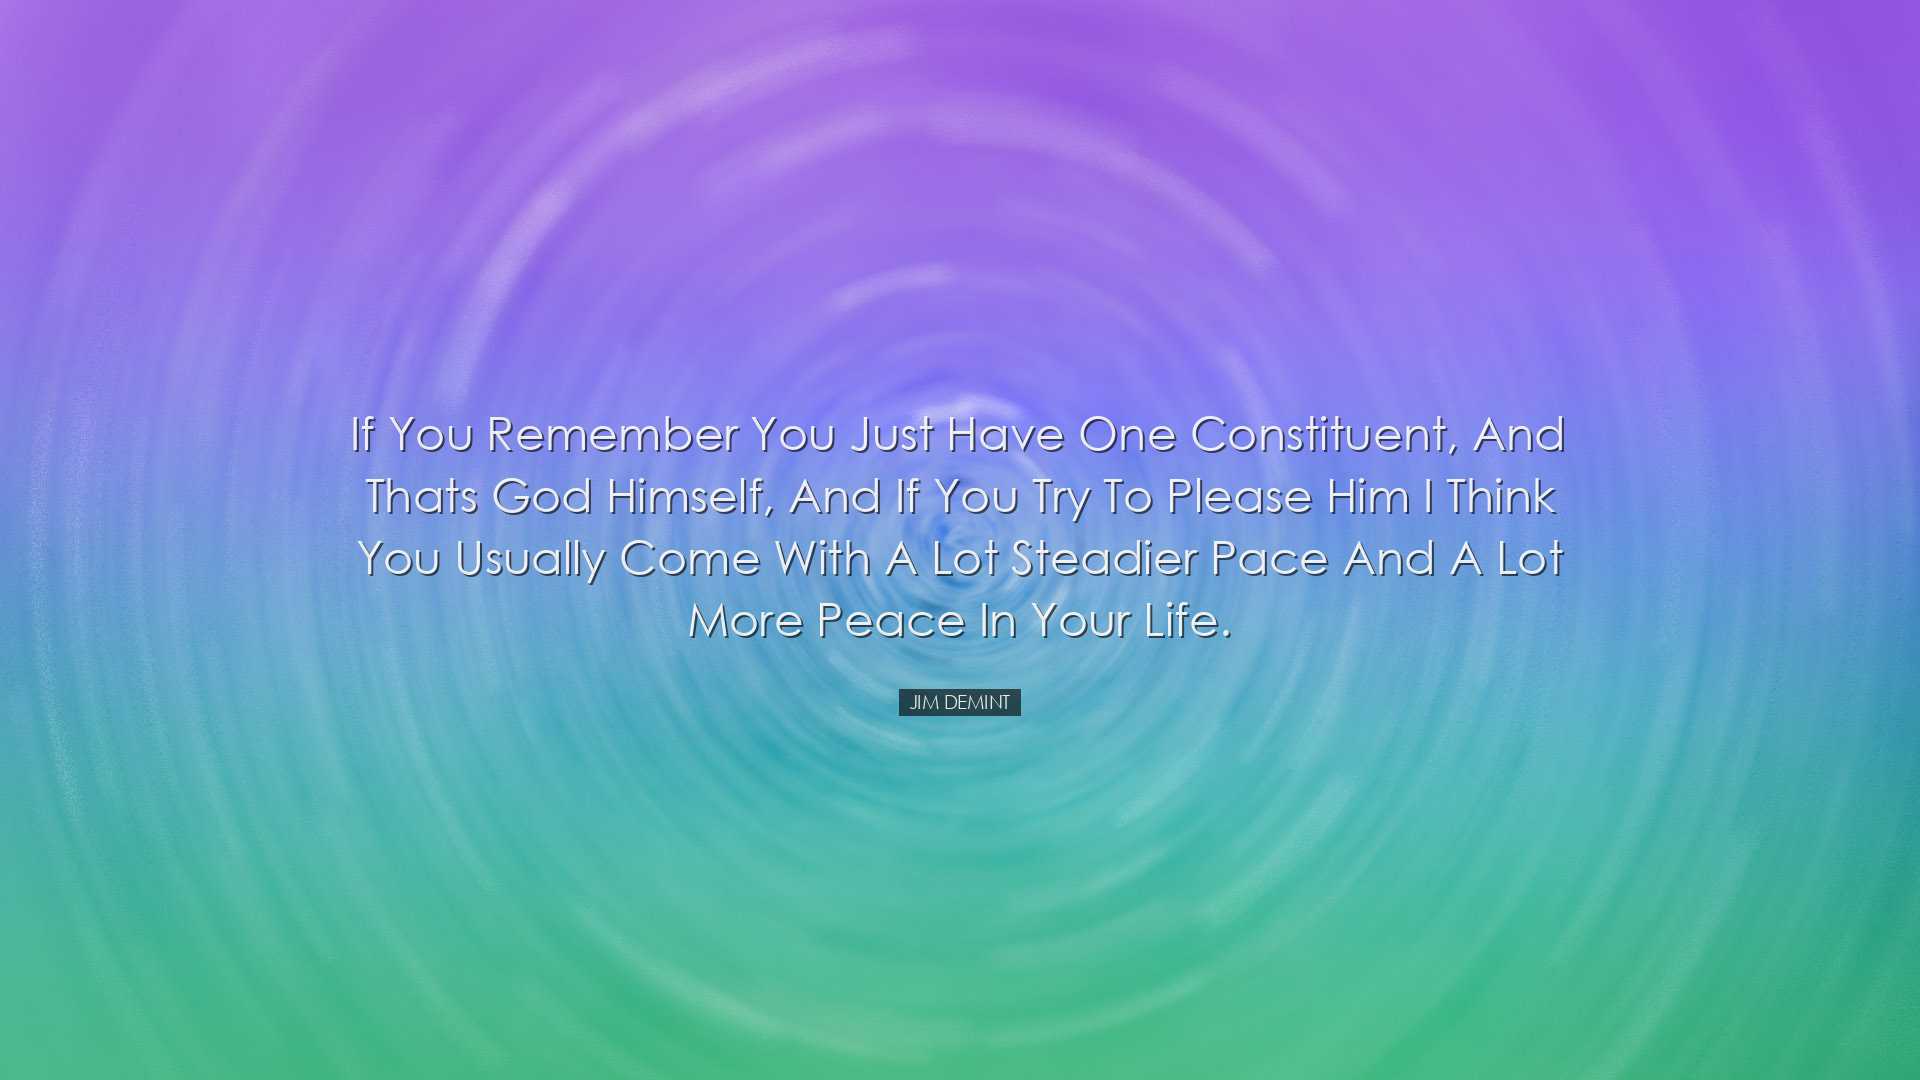 If you remember you just have one constituent, and thats God himse